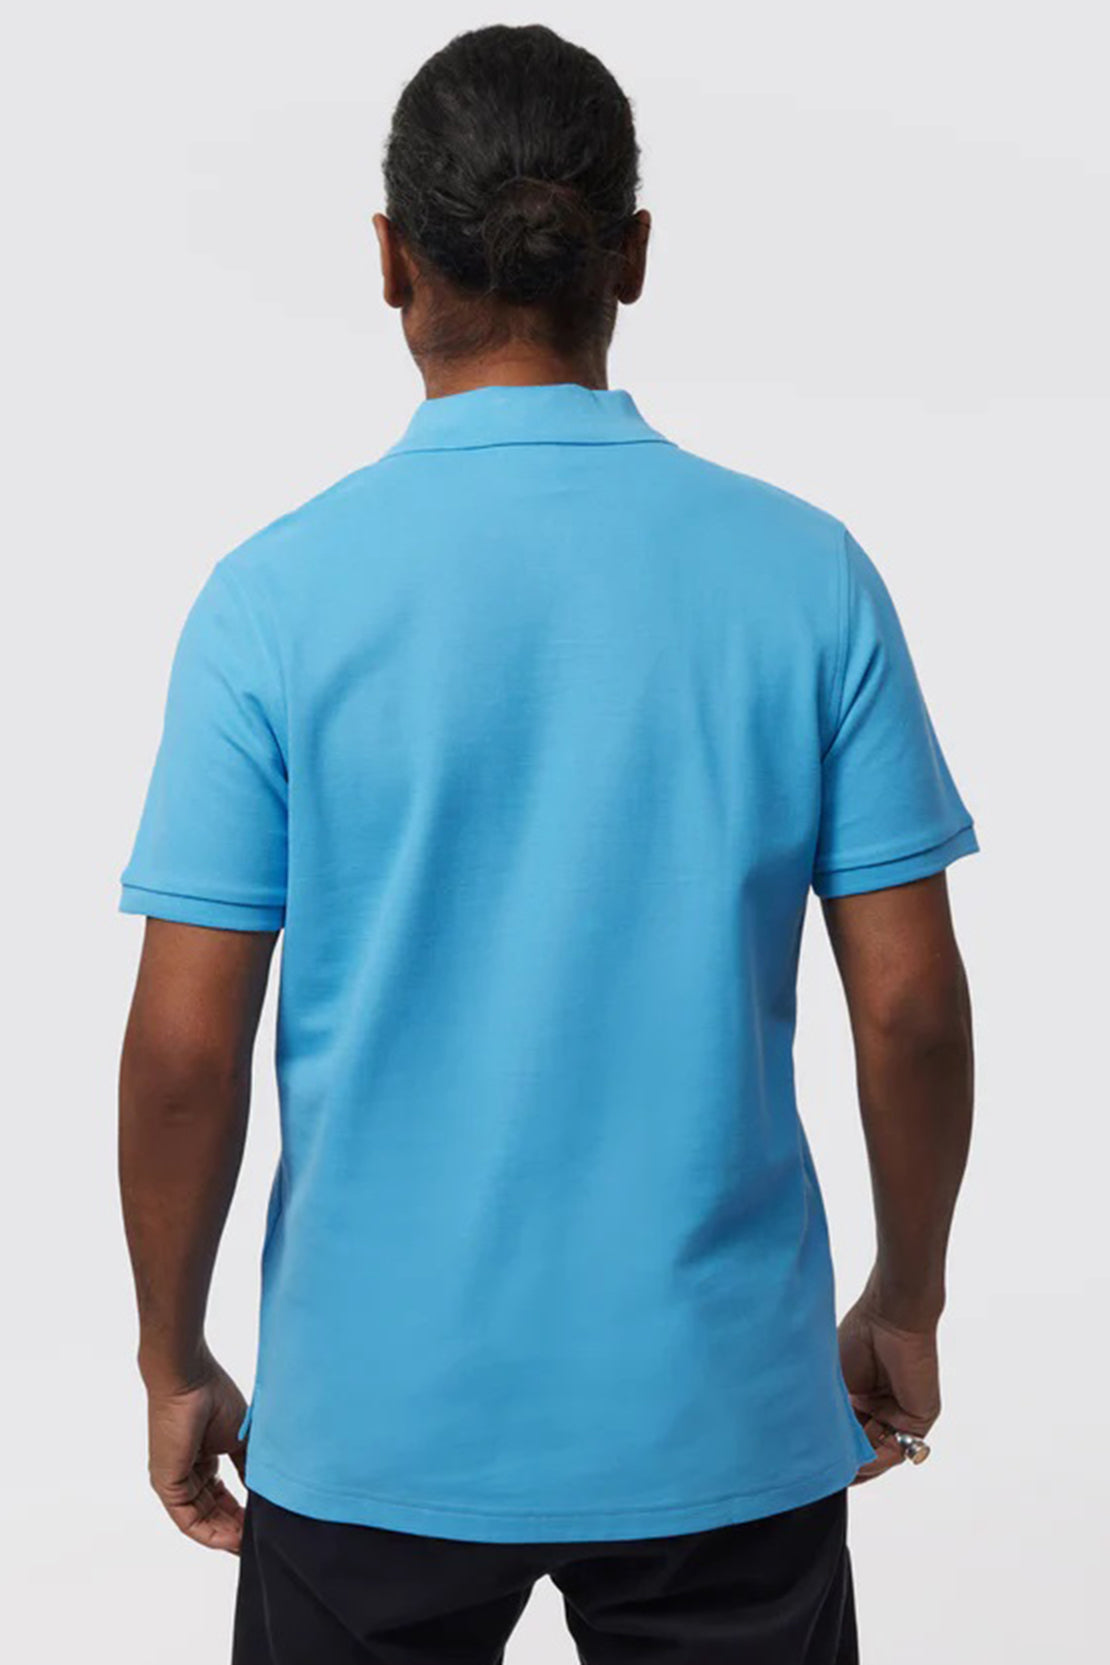 PSYCHO BUNNY - Classic Pique Polo Shirt in Cool Blue B6K001Y1PC